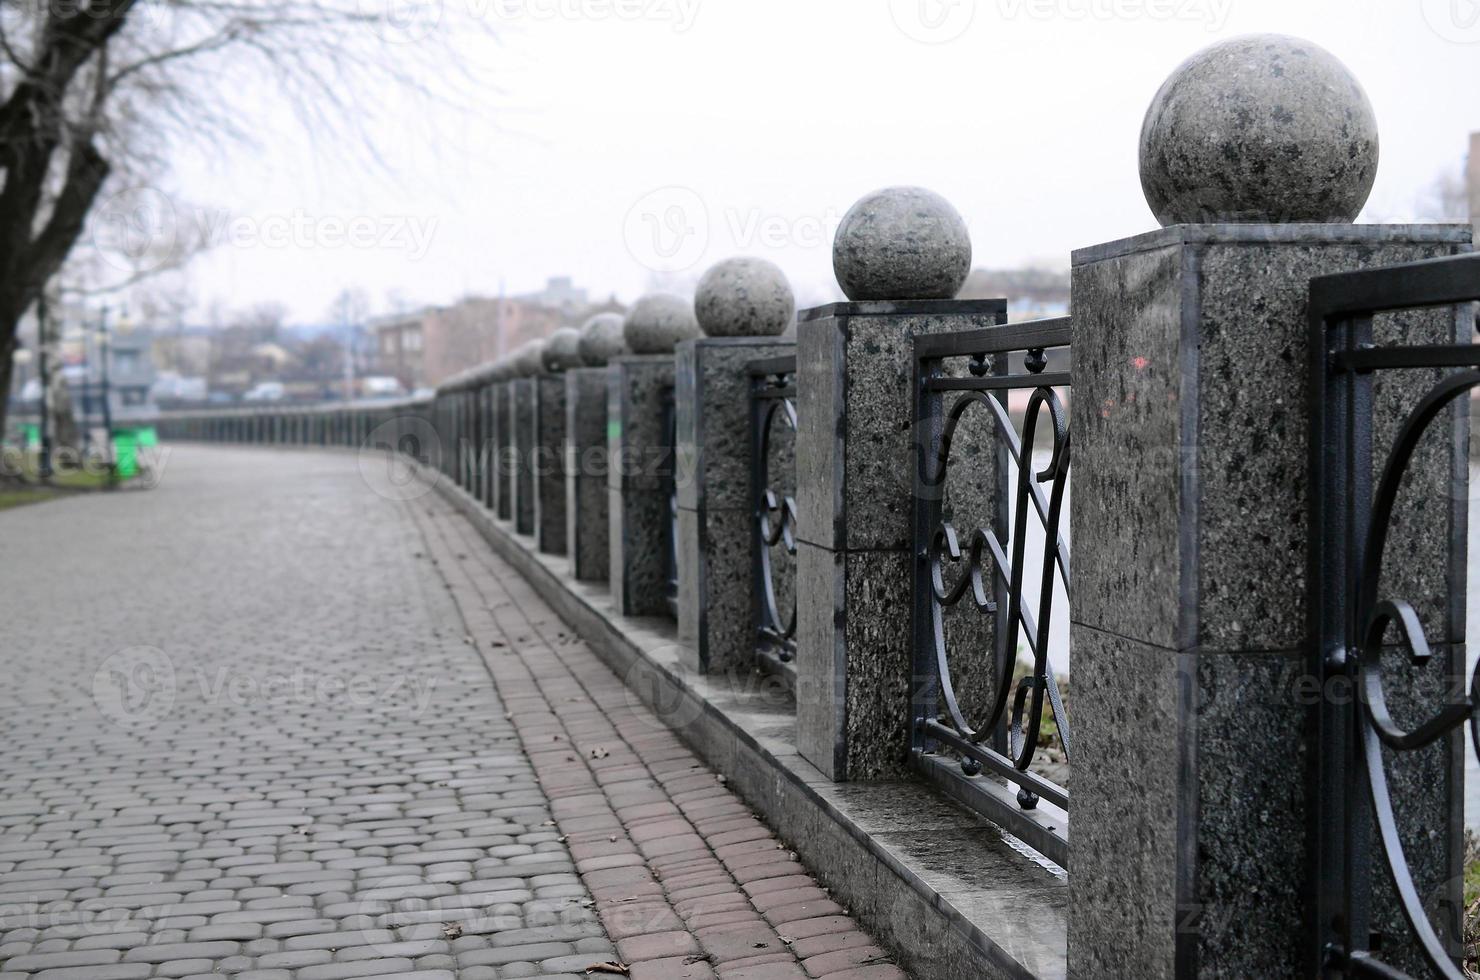 A beautiful granite fence with forged metal sections and decorative balls as decorations. The fence is built along the embankment of the street photo